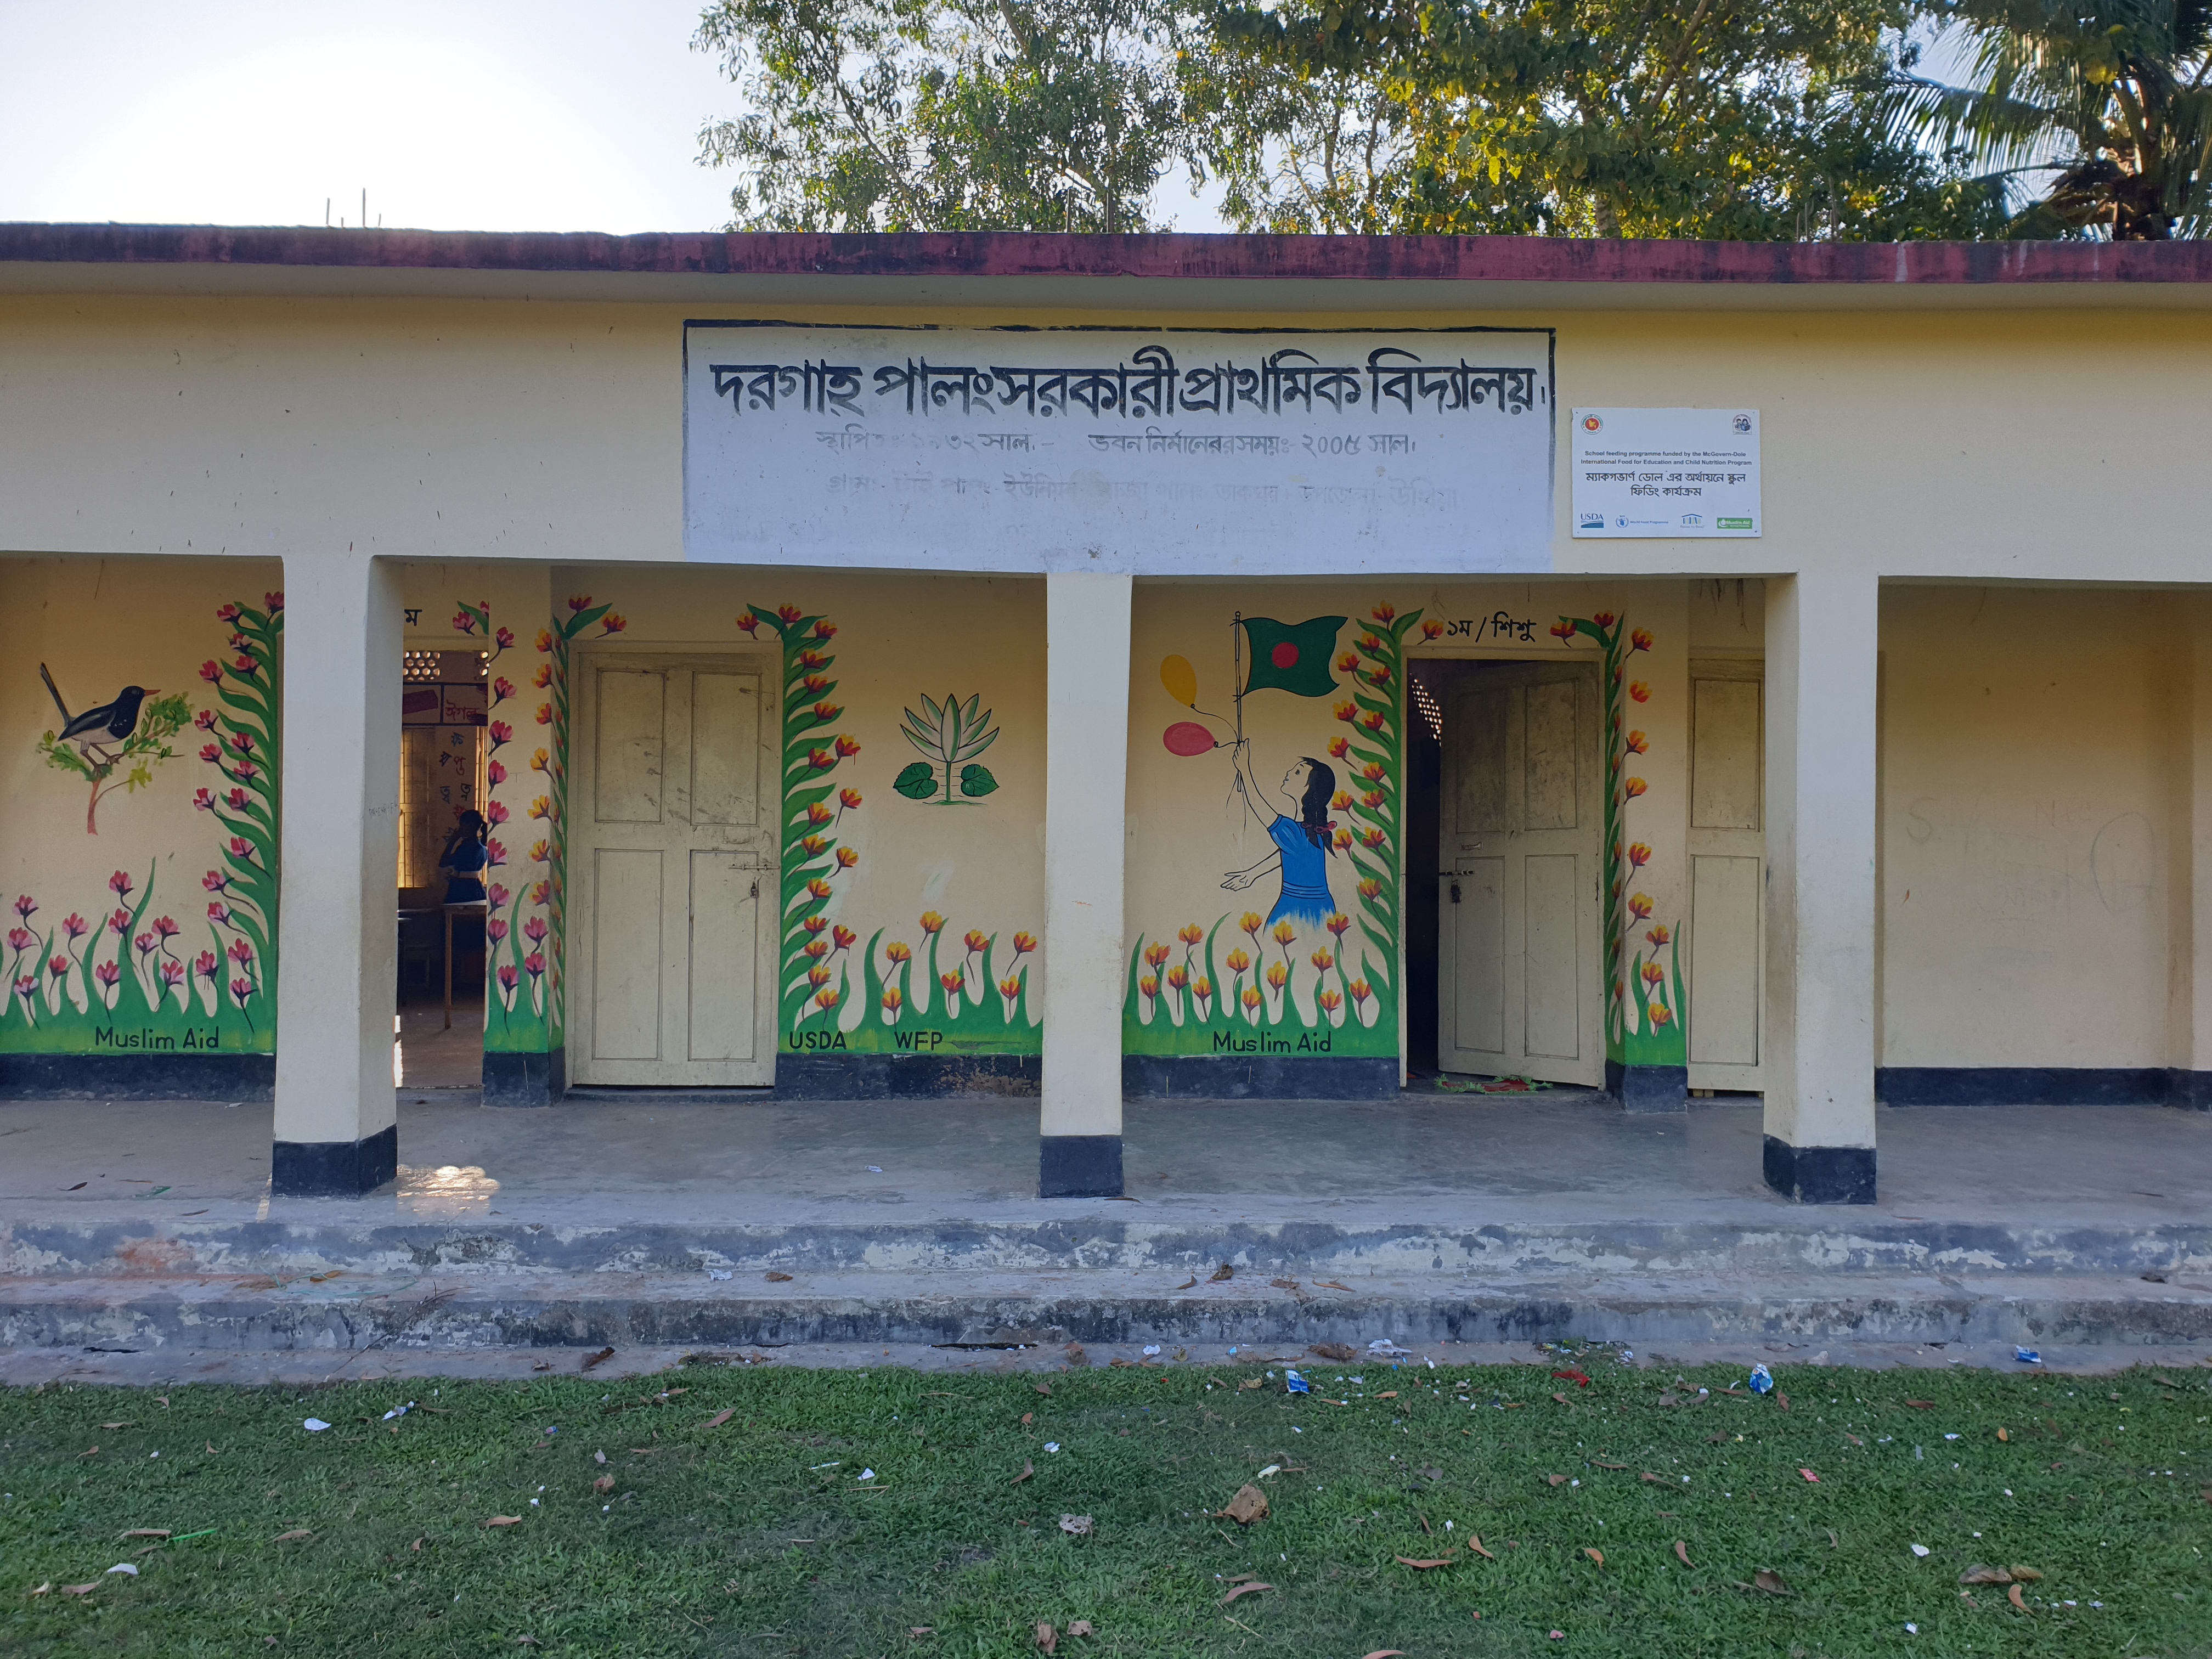 Existing location of school cum disaster shelter building in Dargah Palong